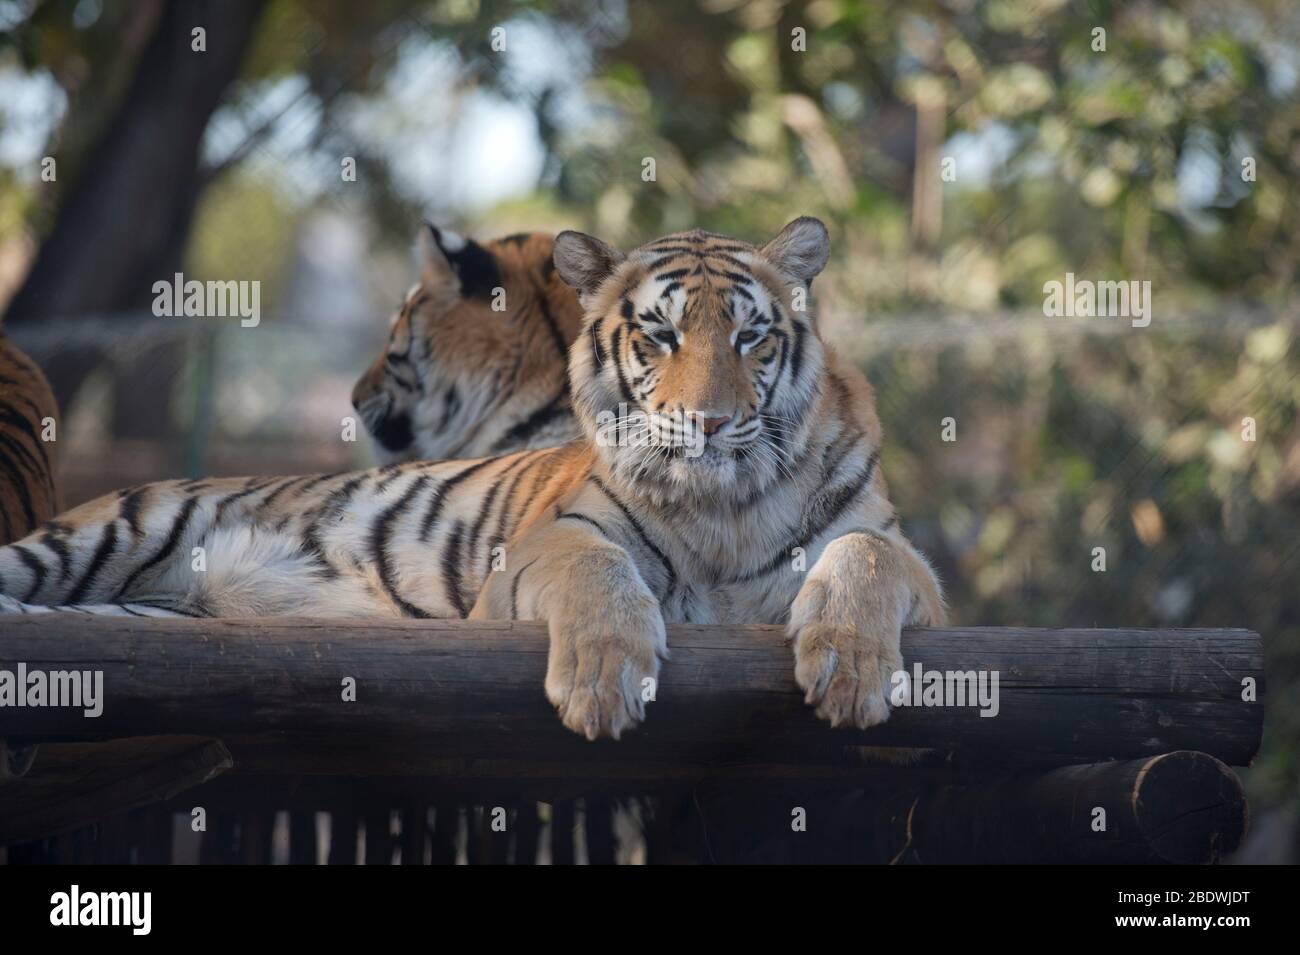 Tigers, Panthera tigris, Endangered, Tzaneen Lion and Predator Park, near Tzaneen, Tzaneen district, Limpopo province, South Africa Stock Photo